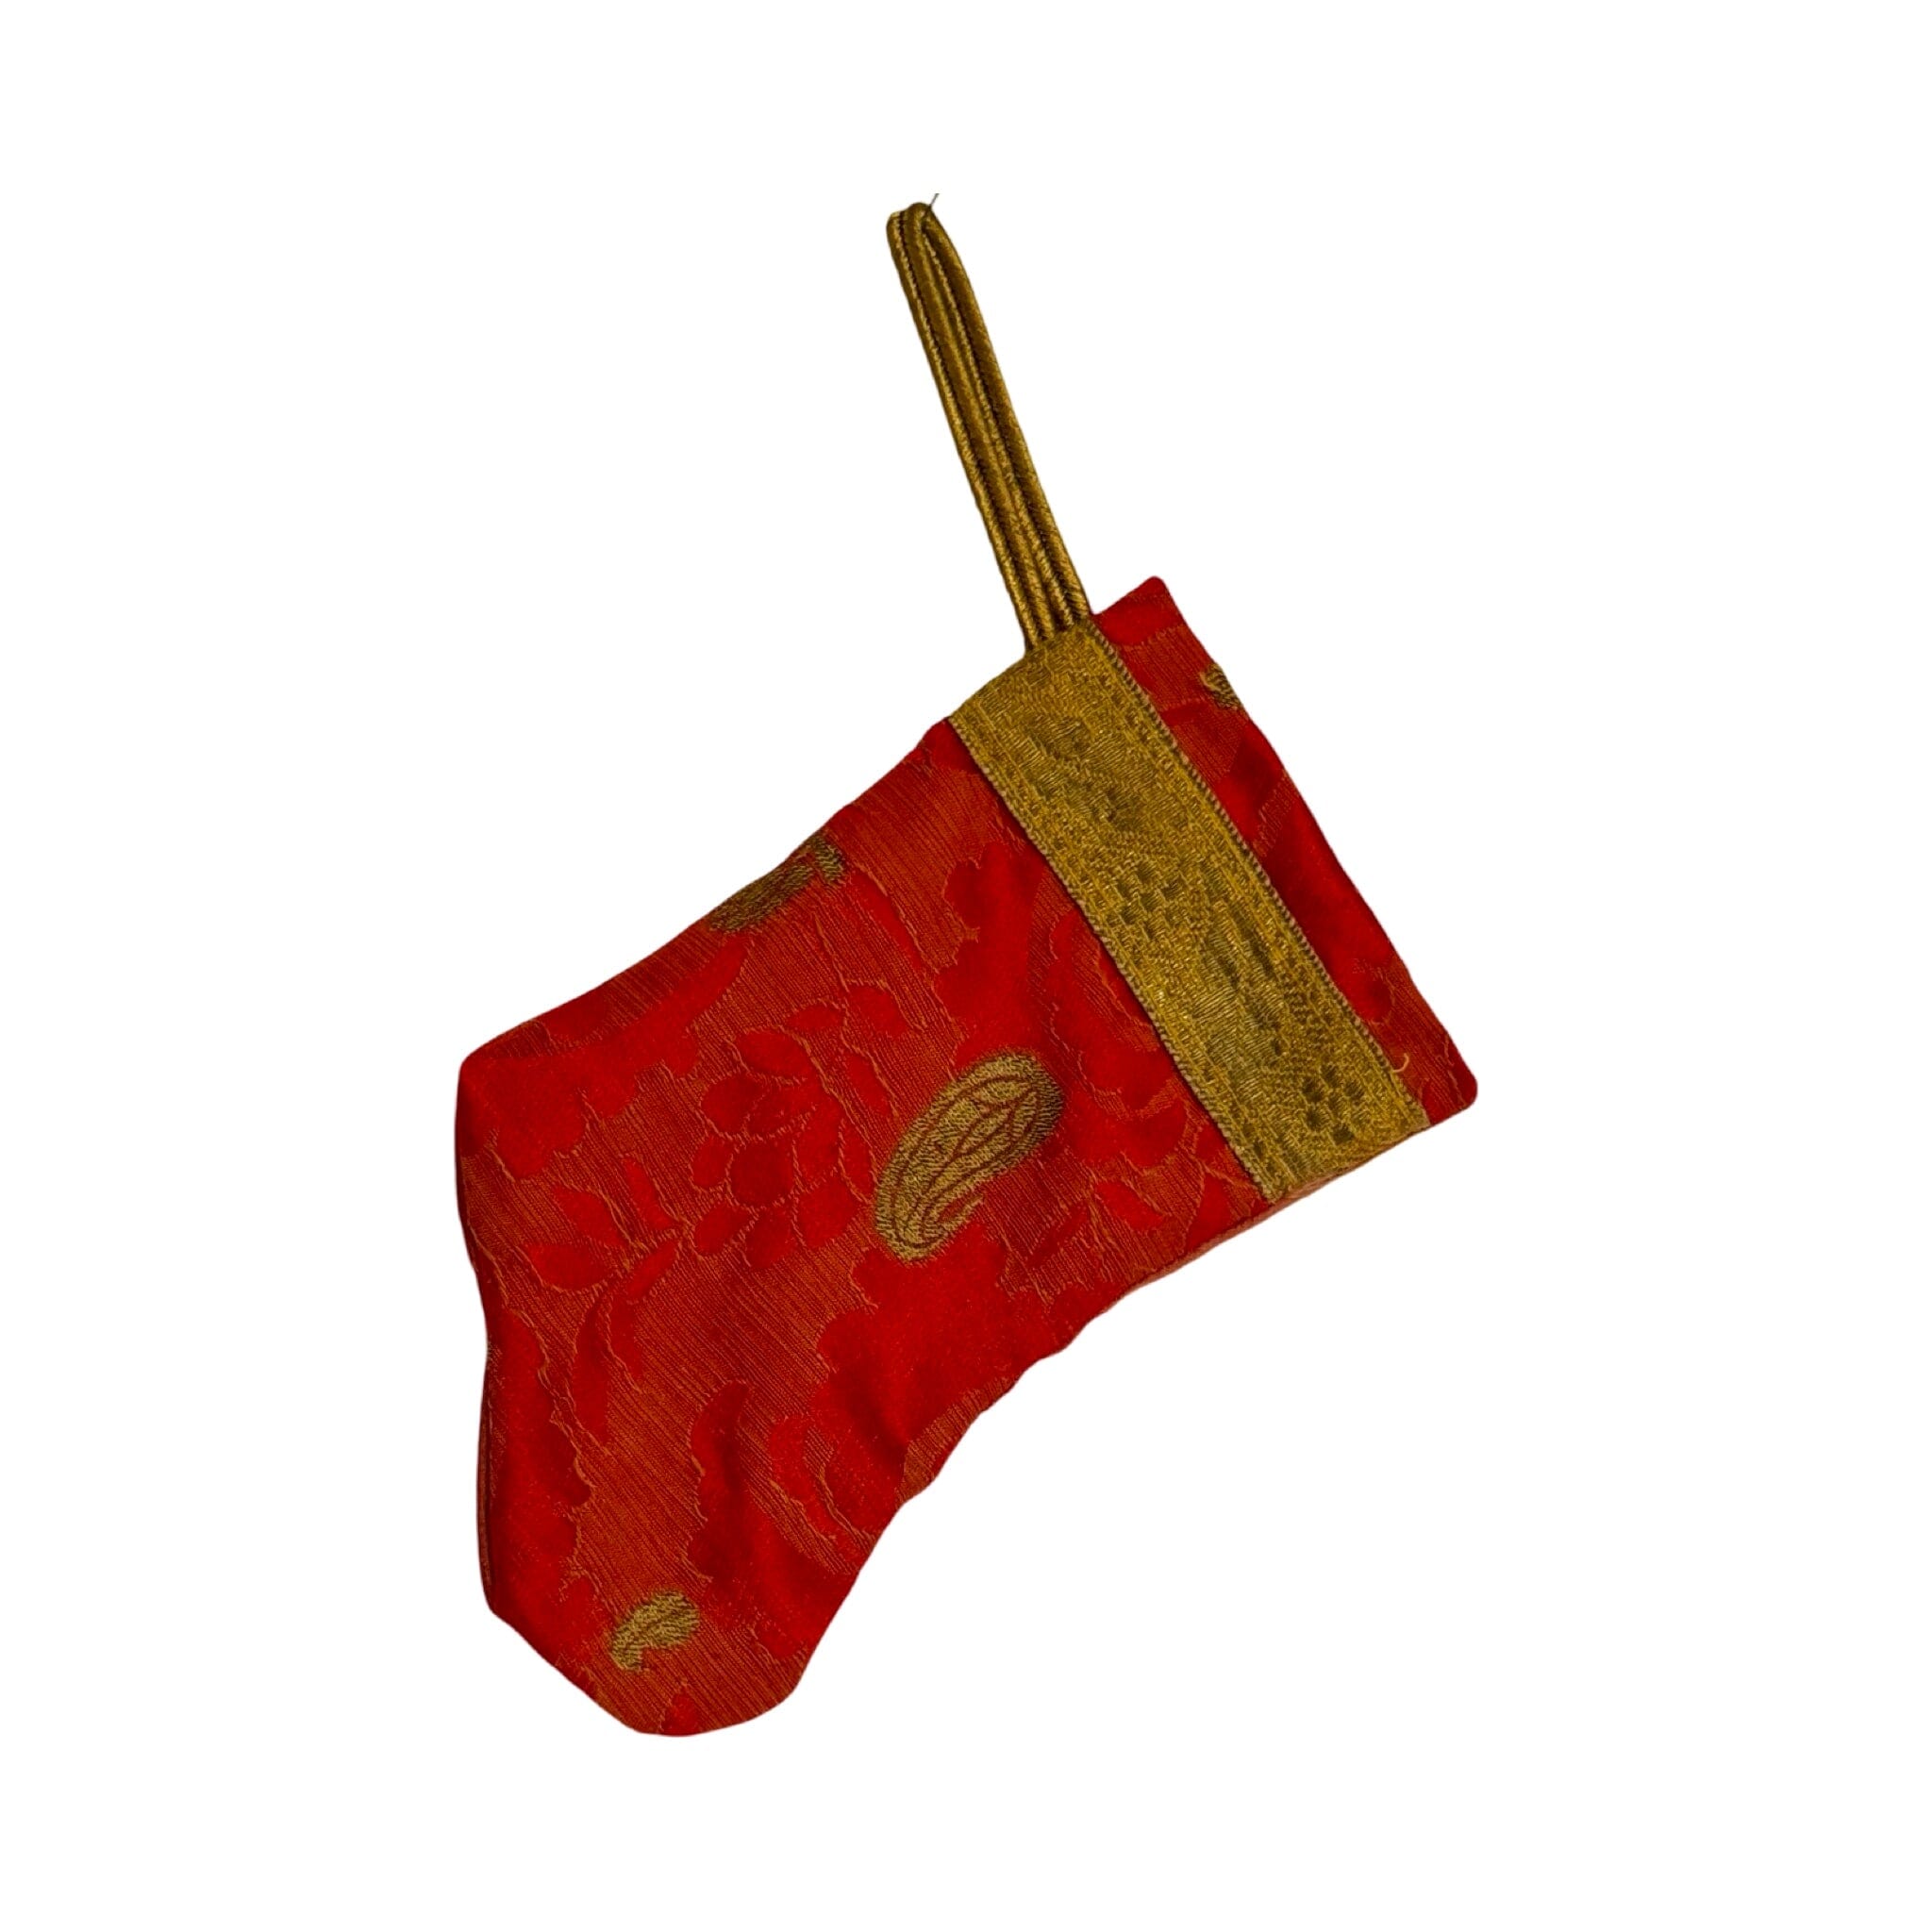 Handmade Mini Stocking Made From Vintage Fabric and Trims- Red and Gold Ornament B. Viz Design A 